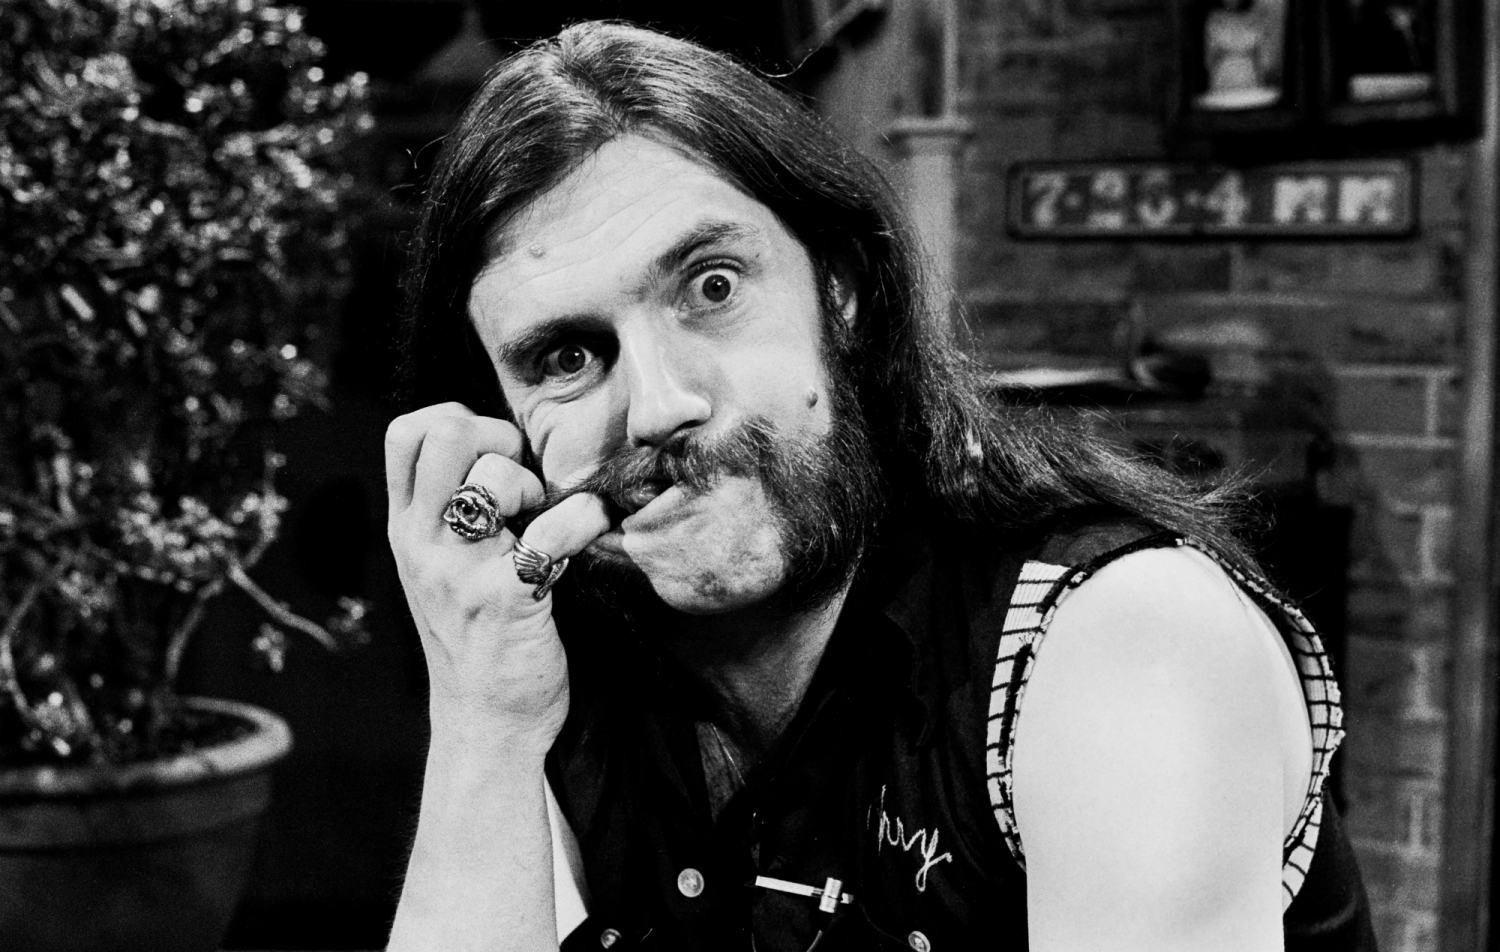 Warriors On The Edge: When Lemmy got booted from Hawkwind